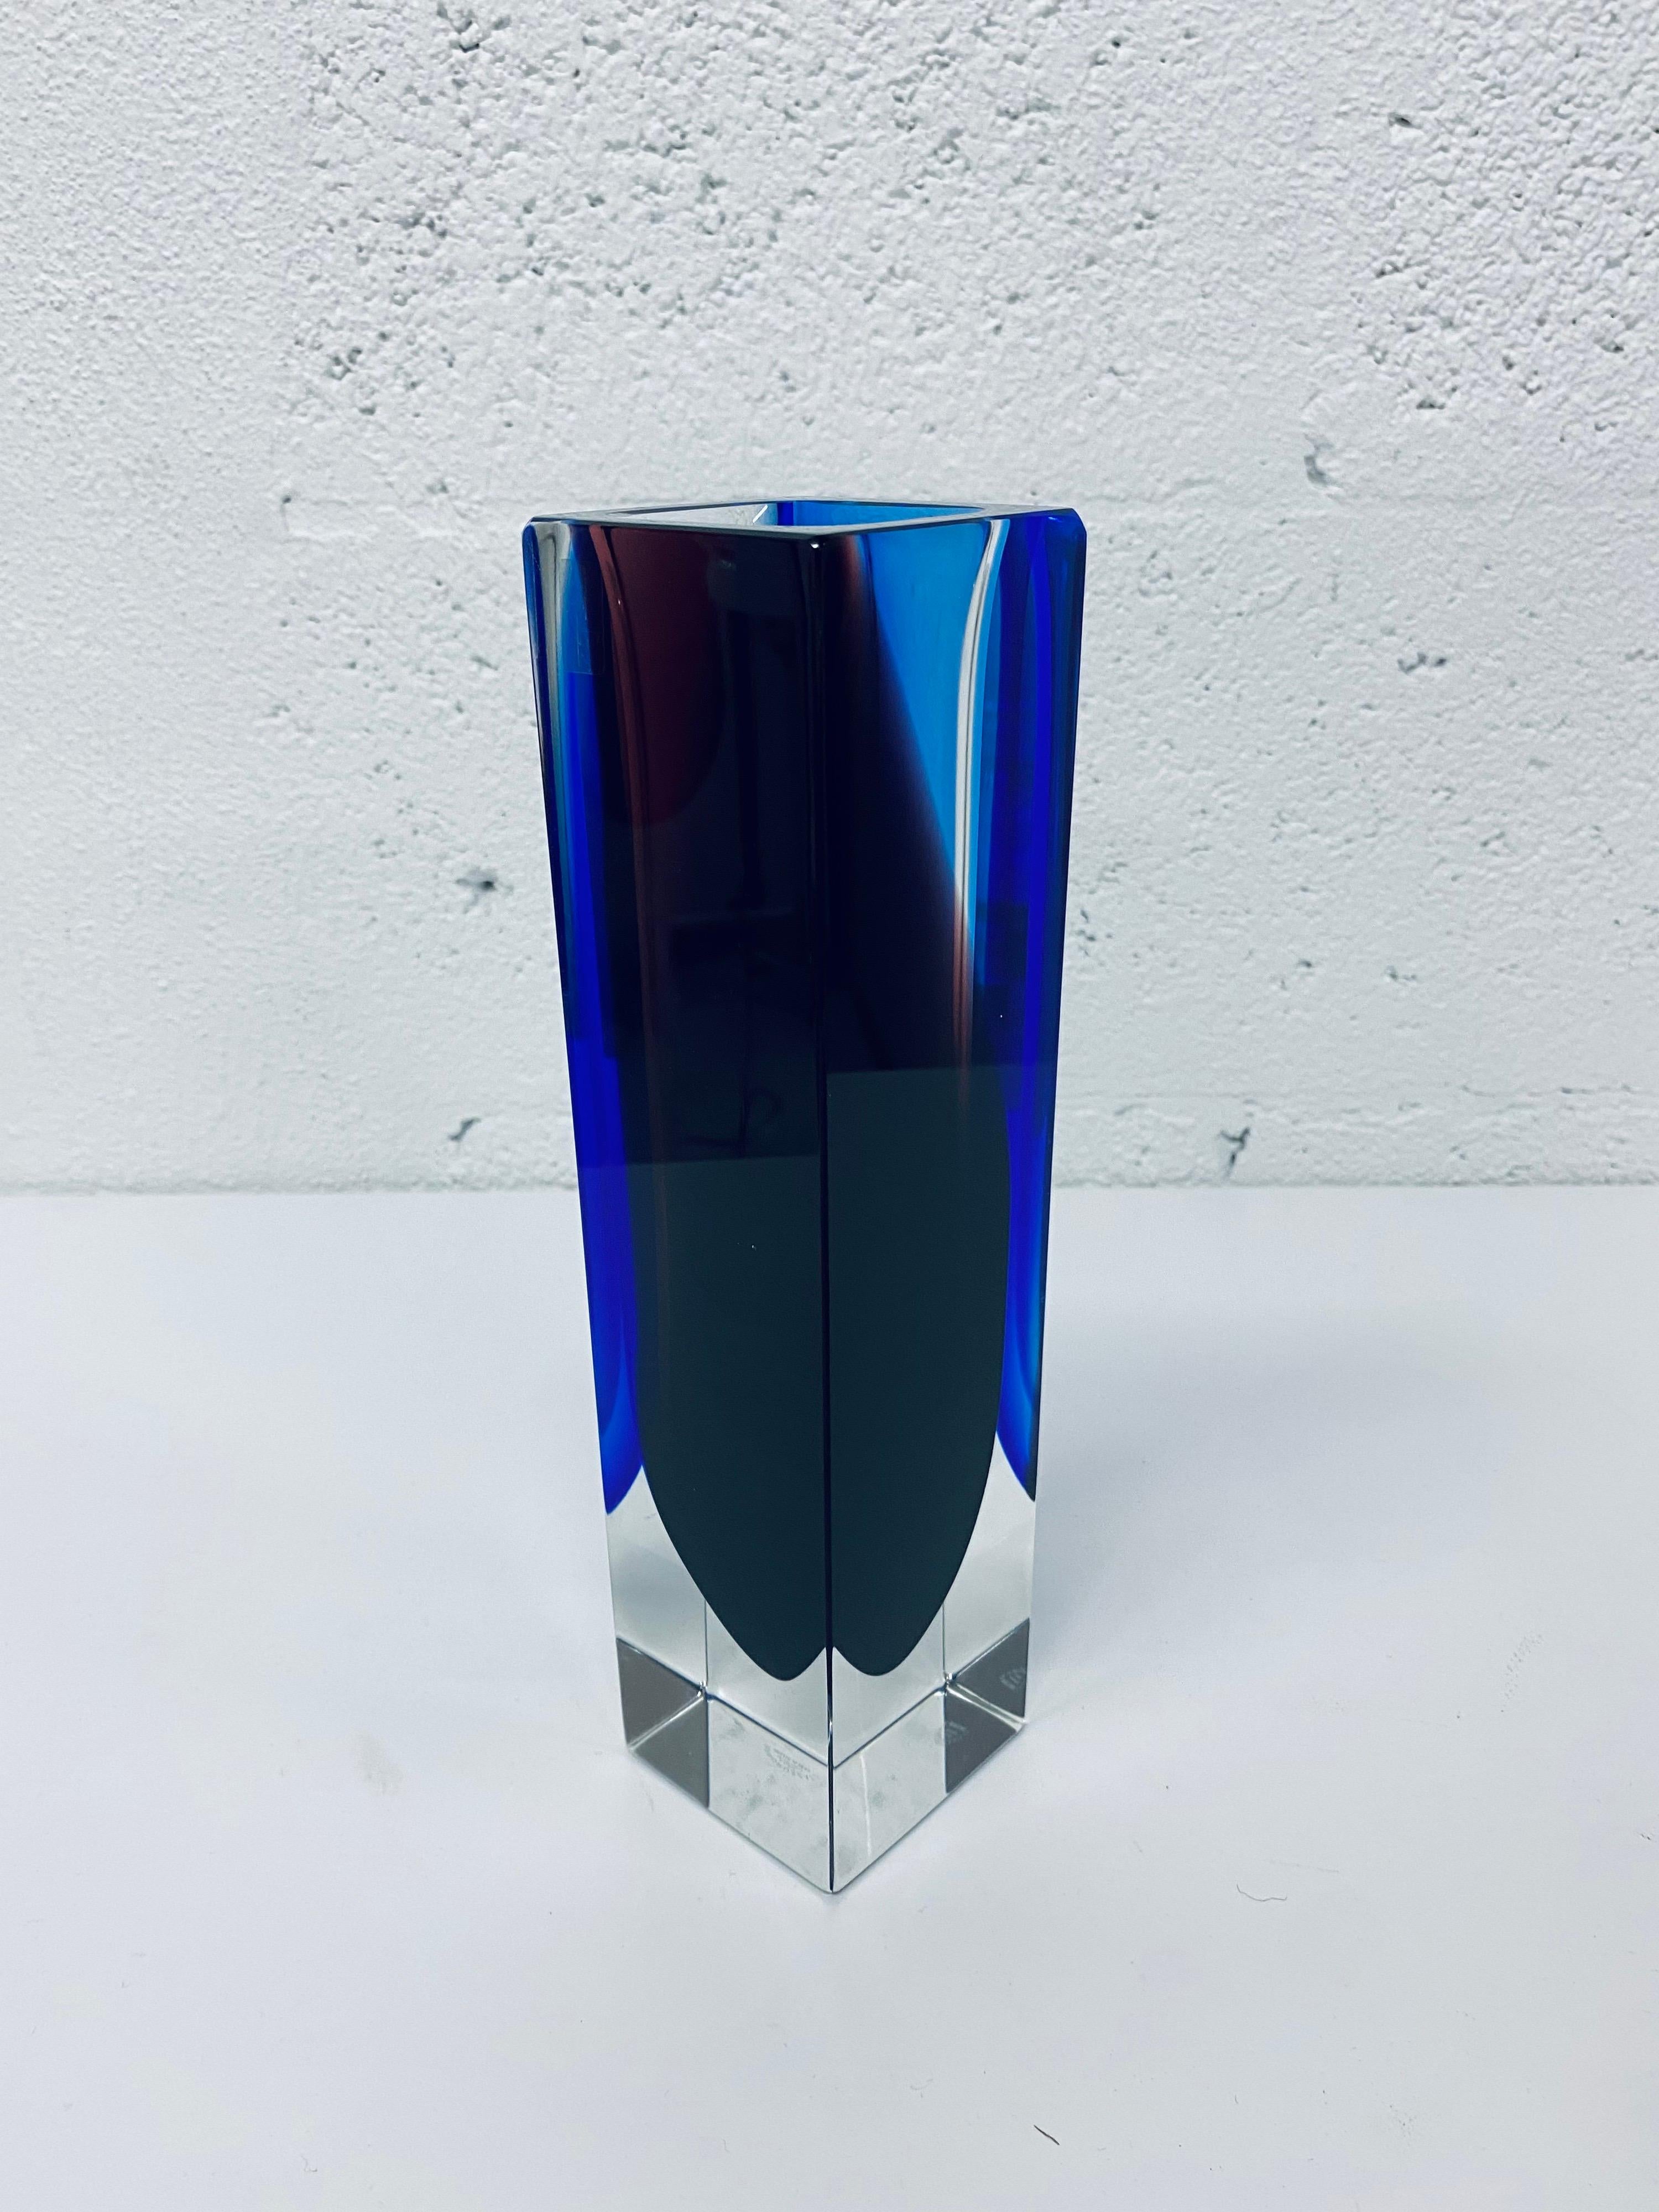 Alessandro Mandruzatto Hand Worked Blue and Purple Sommerso Block Vase 6